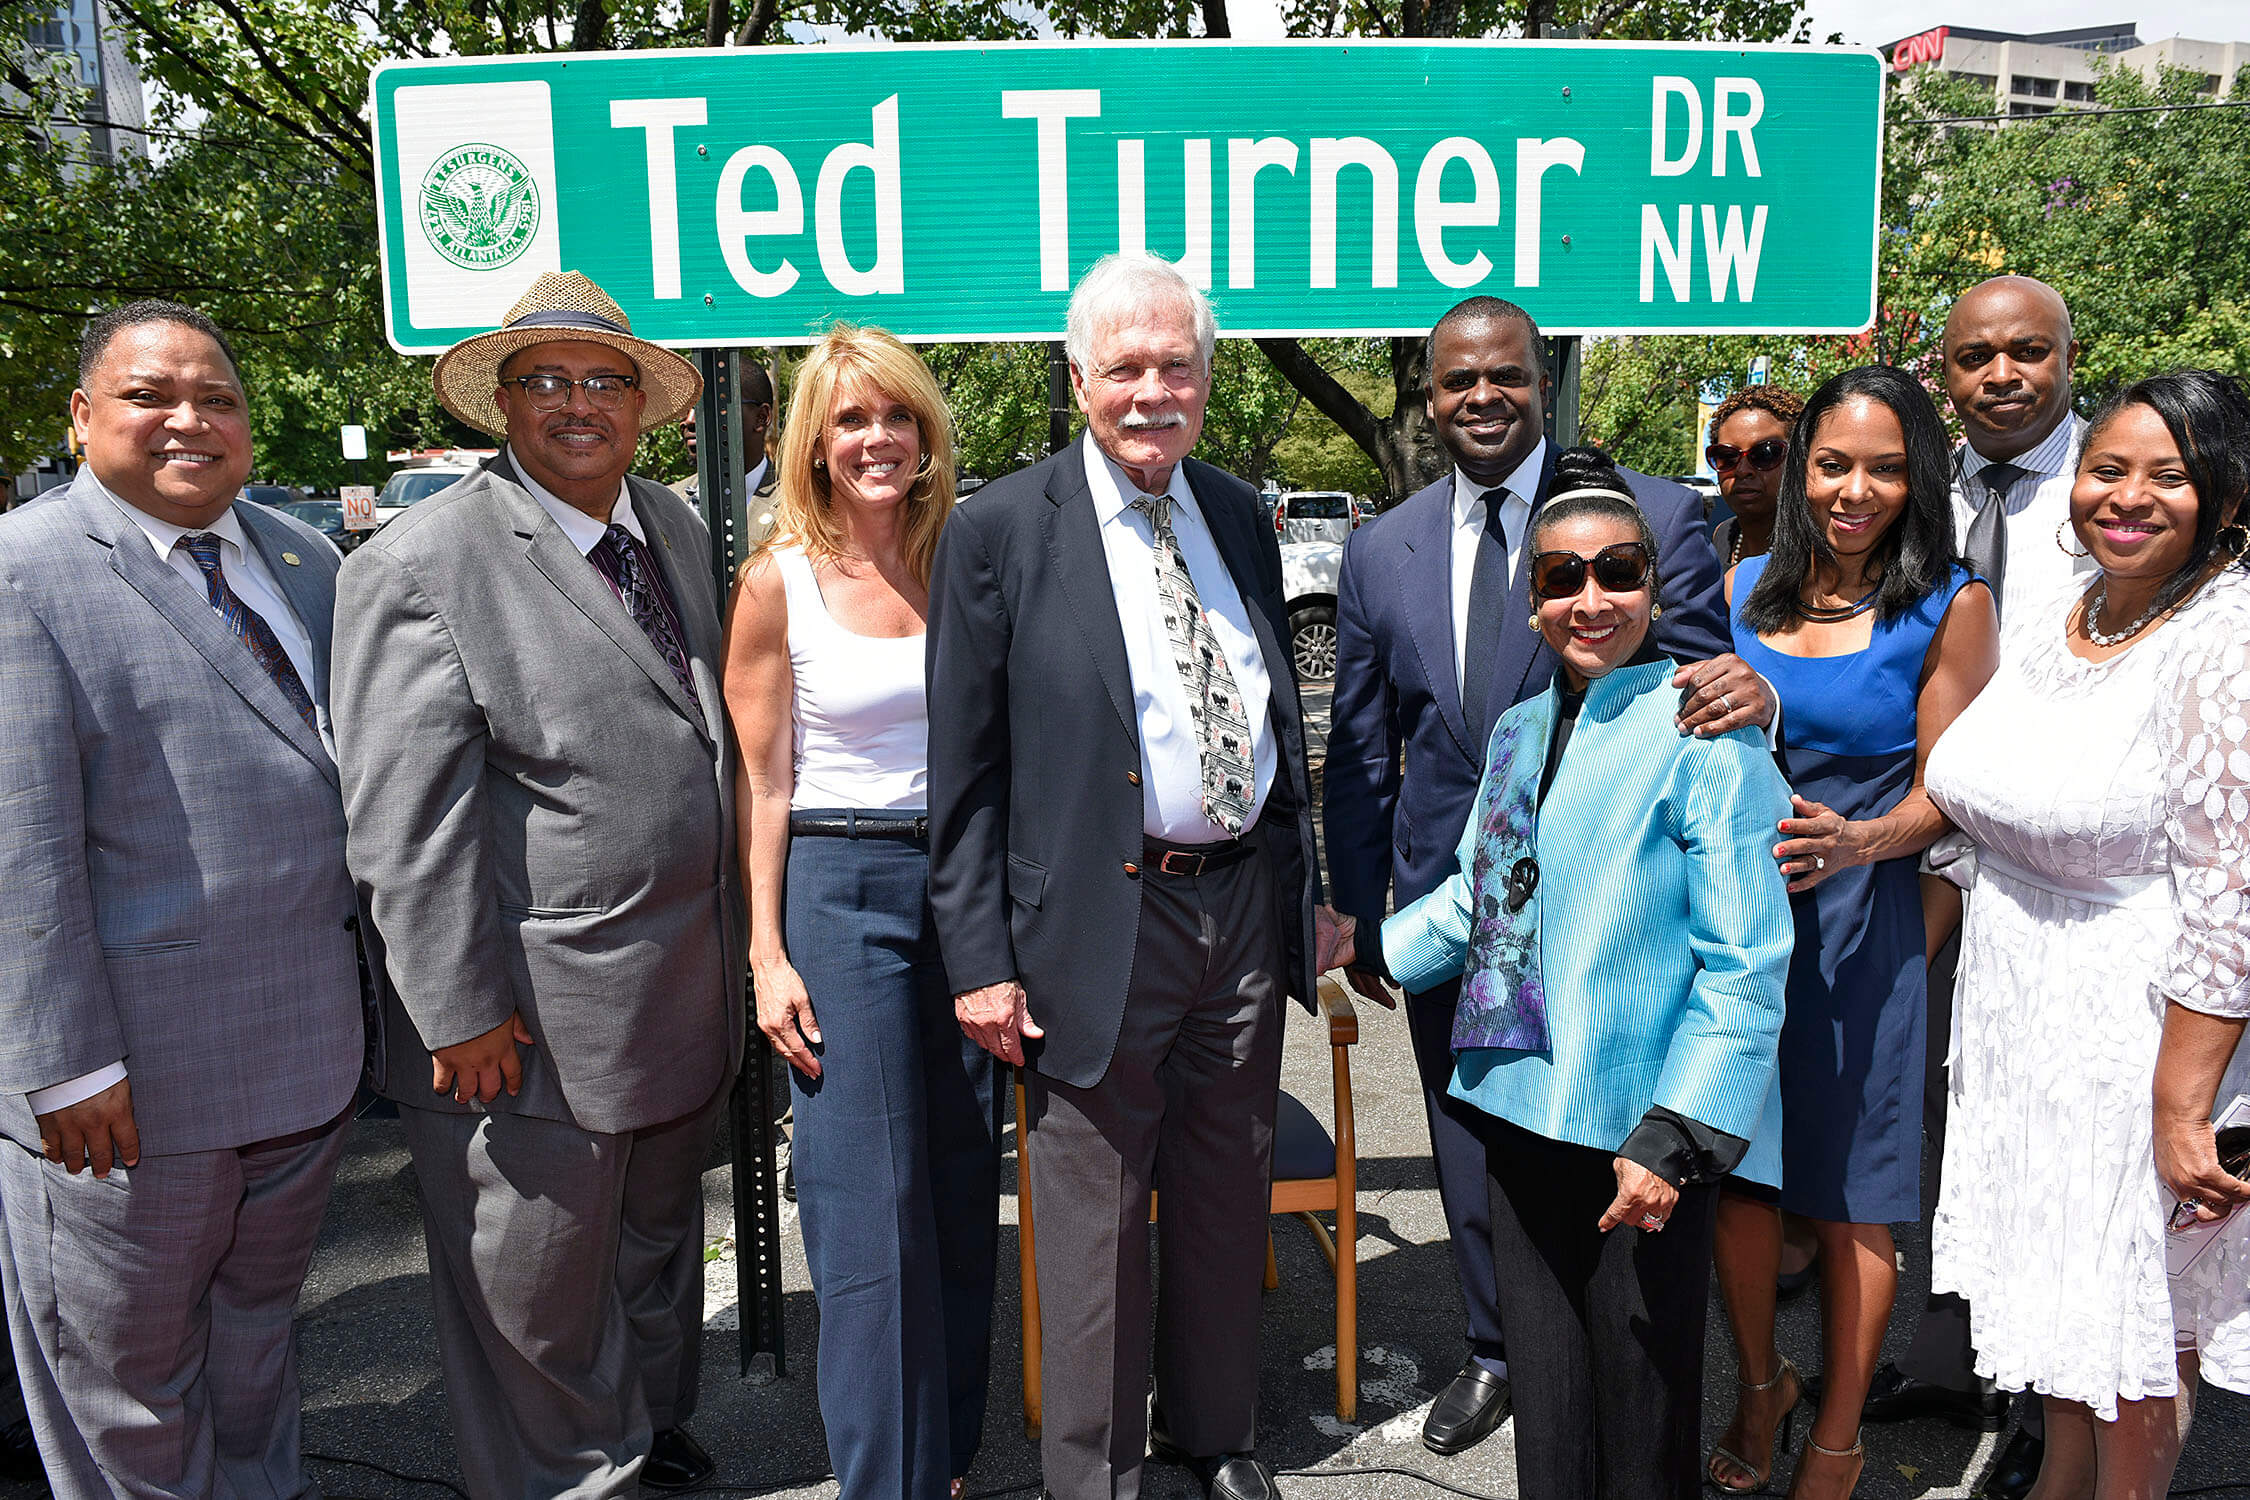 Major street in Atlanta re-named Ted Turner Drive in honor of his numerous contributions to the city